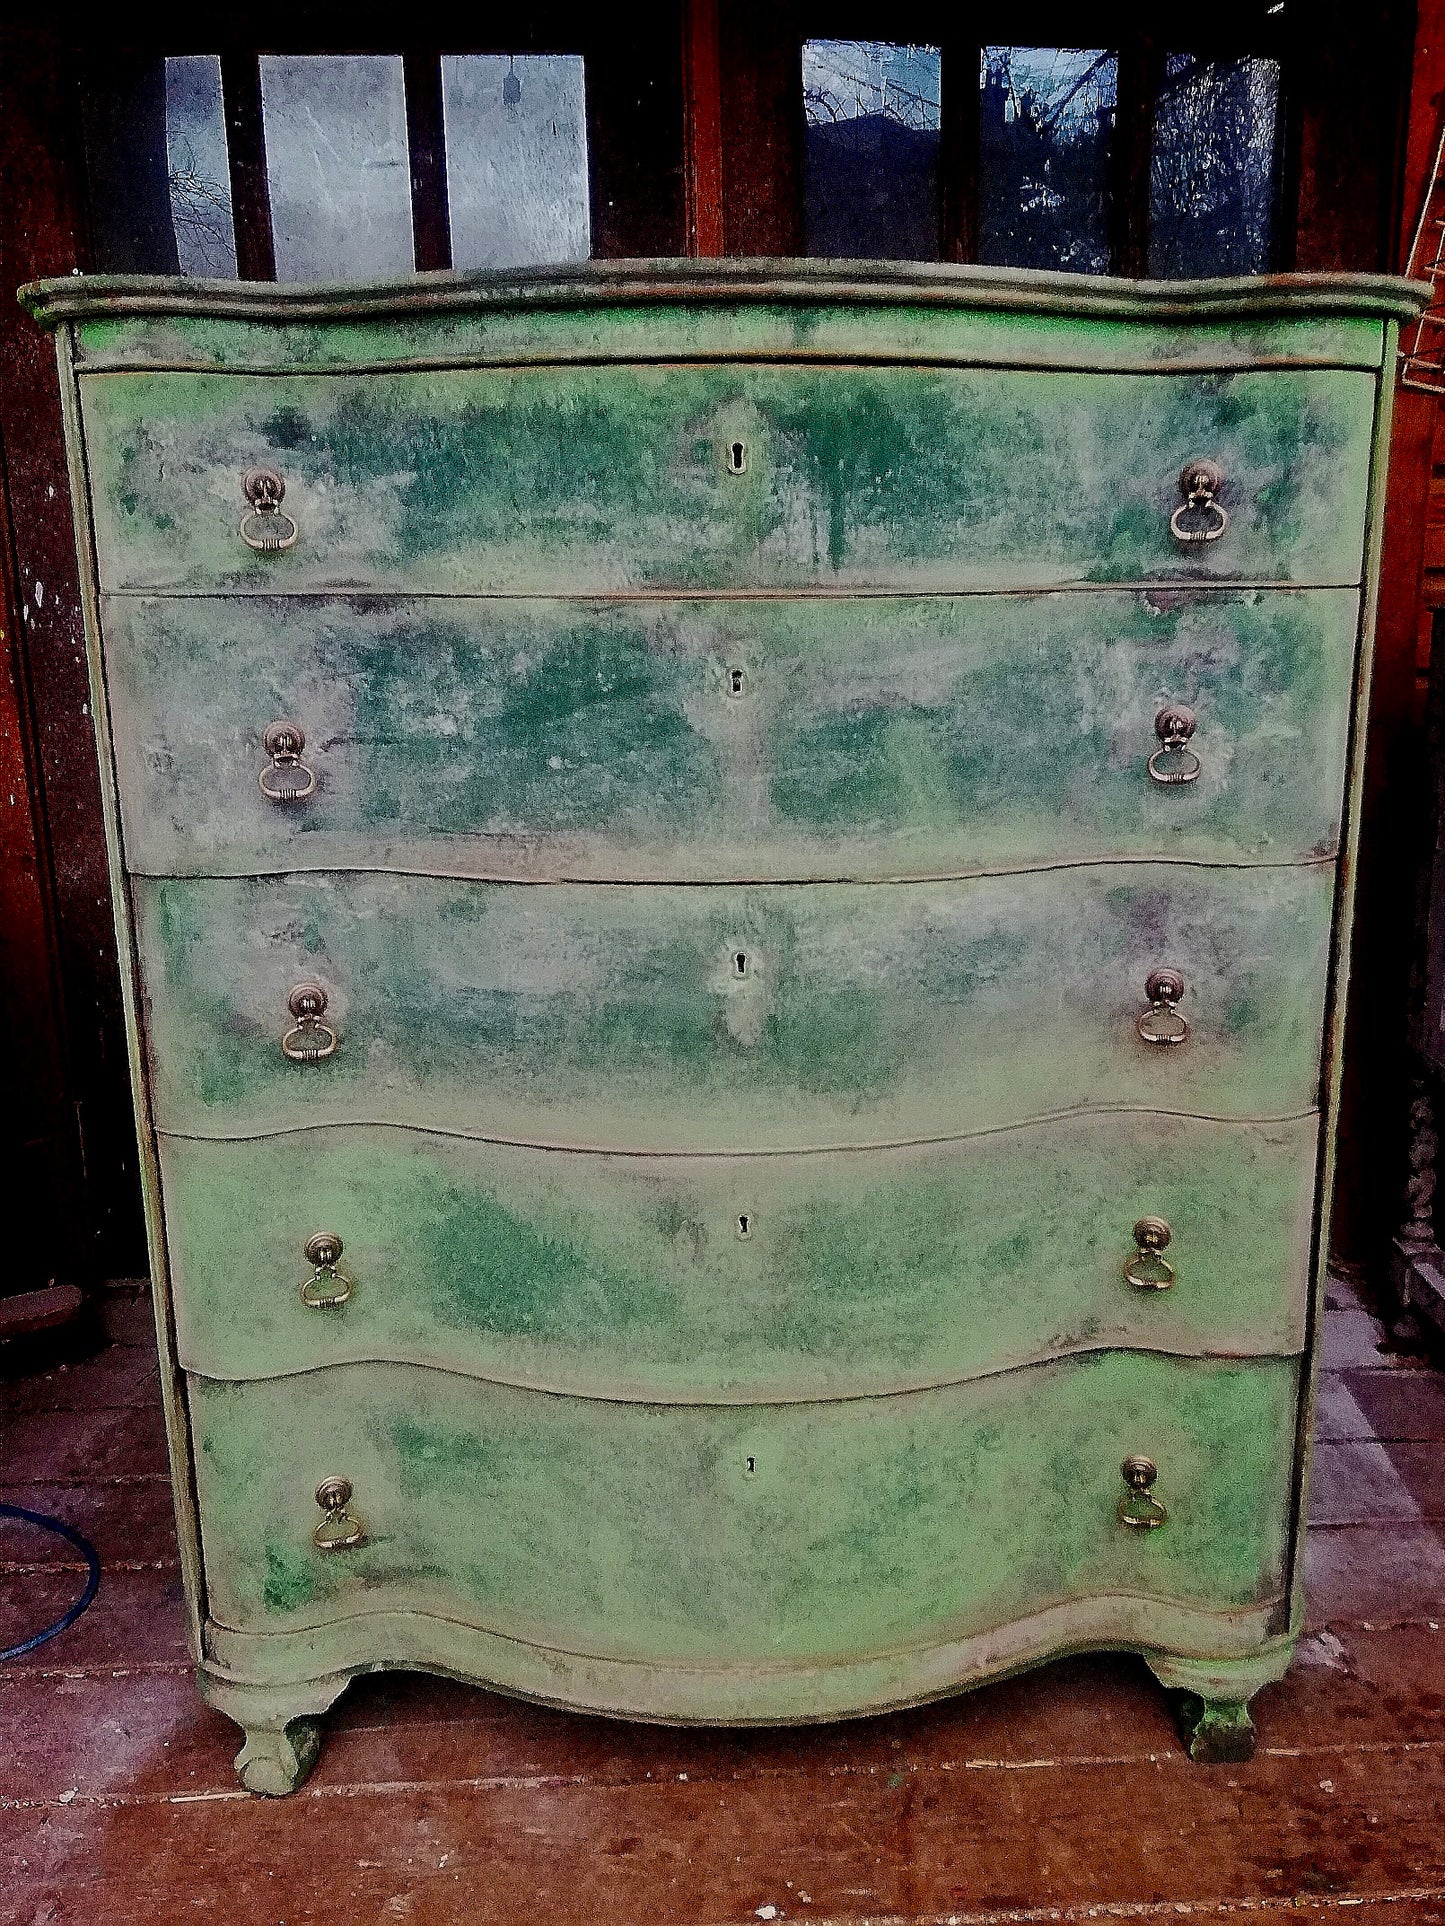 Commission for Laura Layered Annie Sloan chest of drawers in Greens